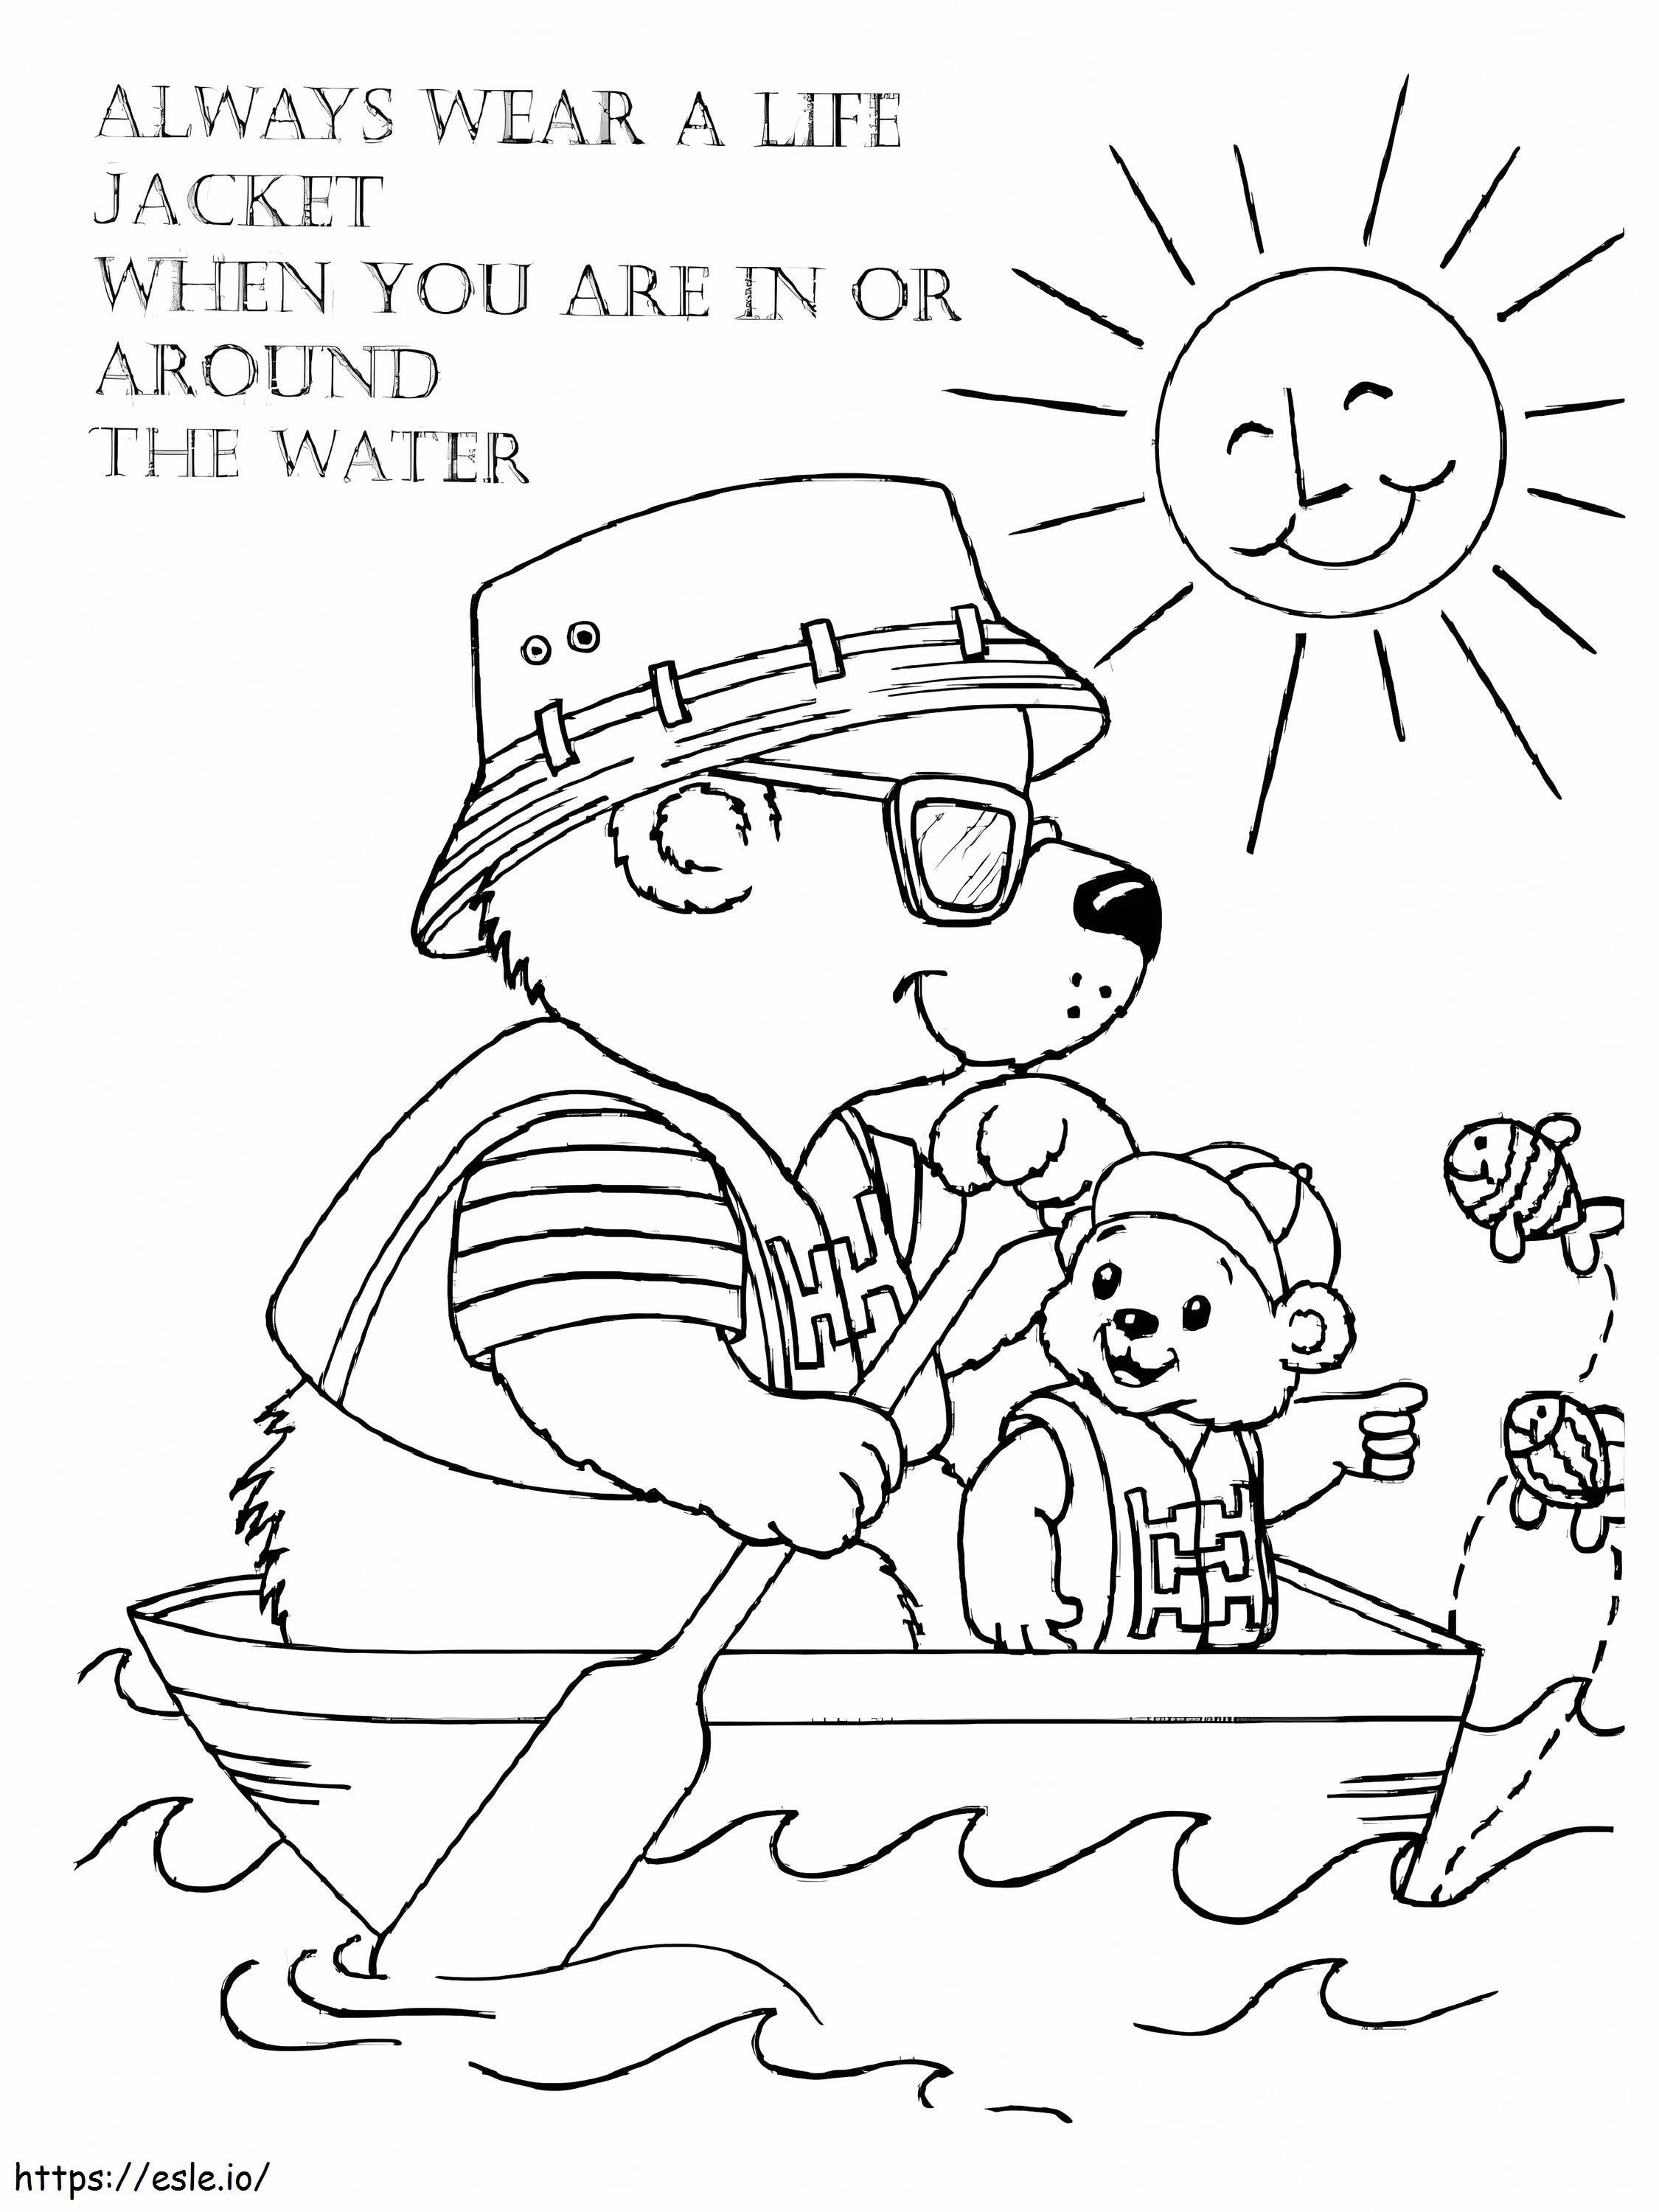 Always Wear A Life Jacket coloring page